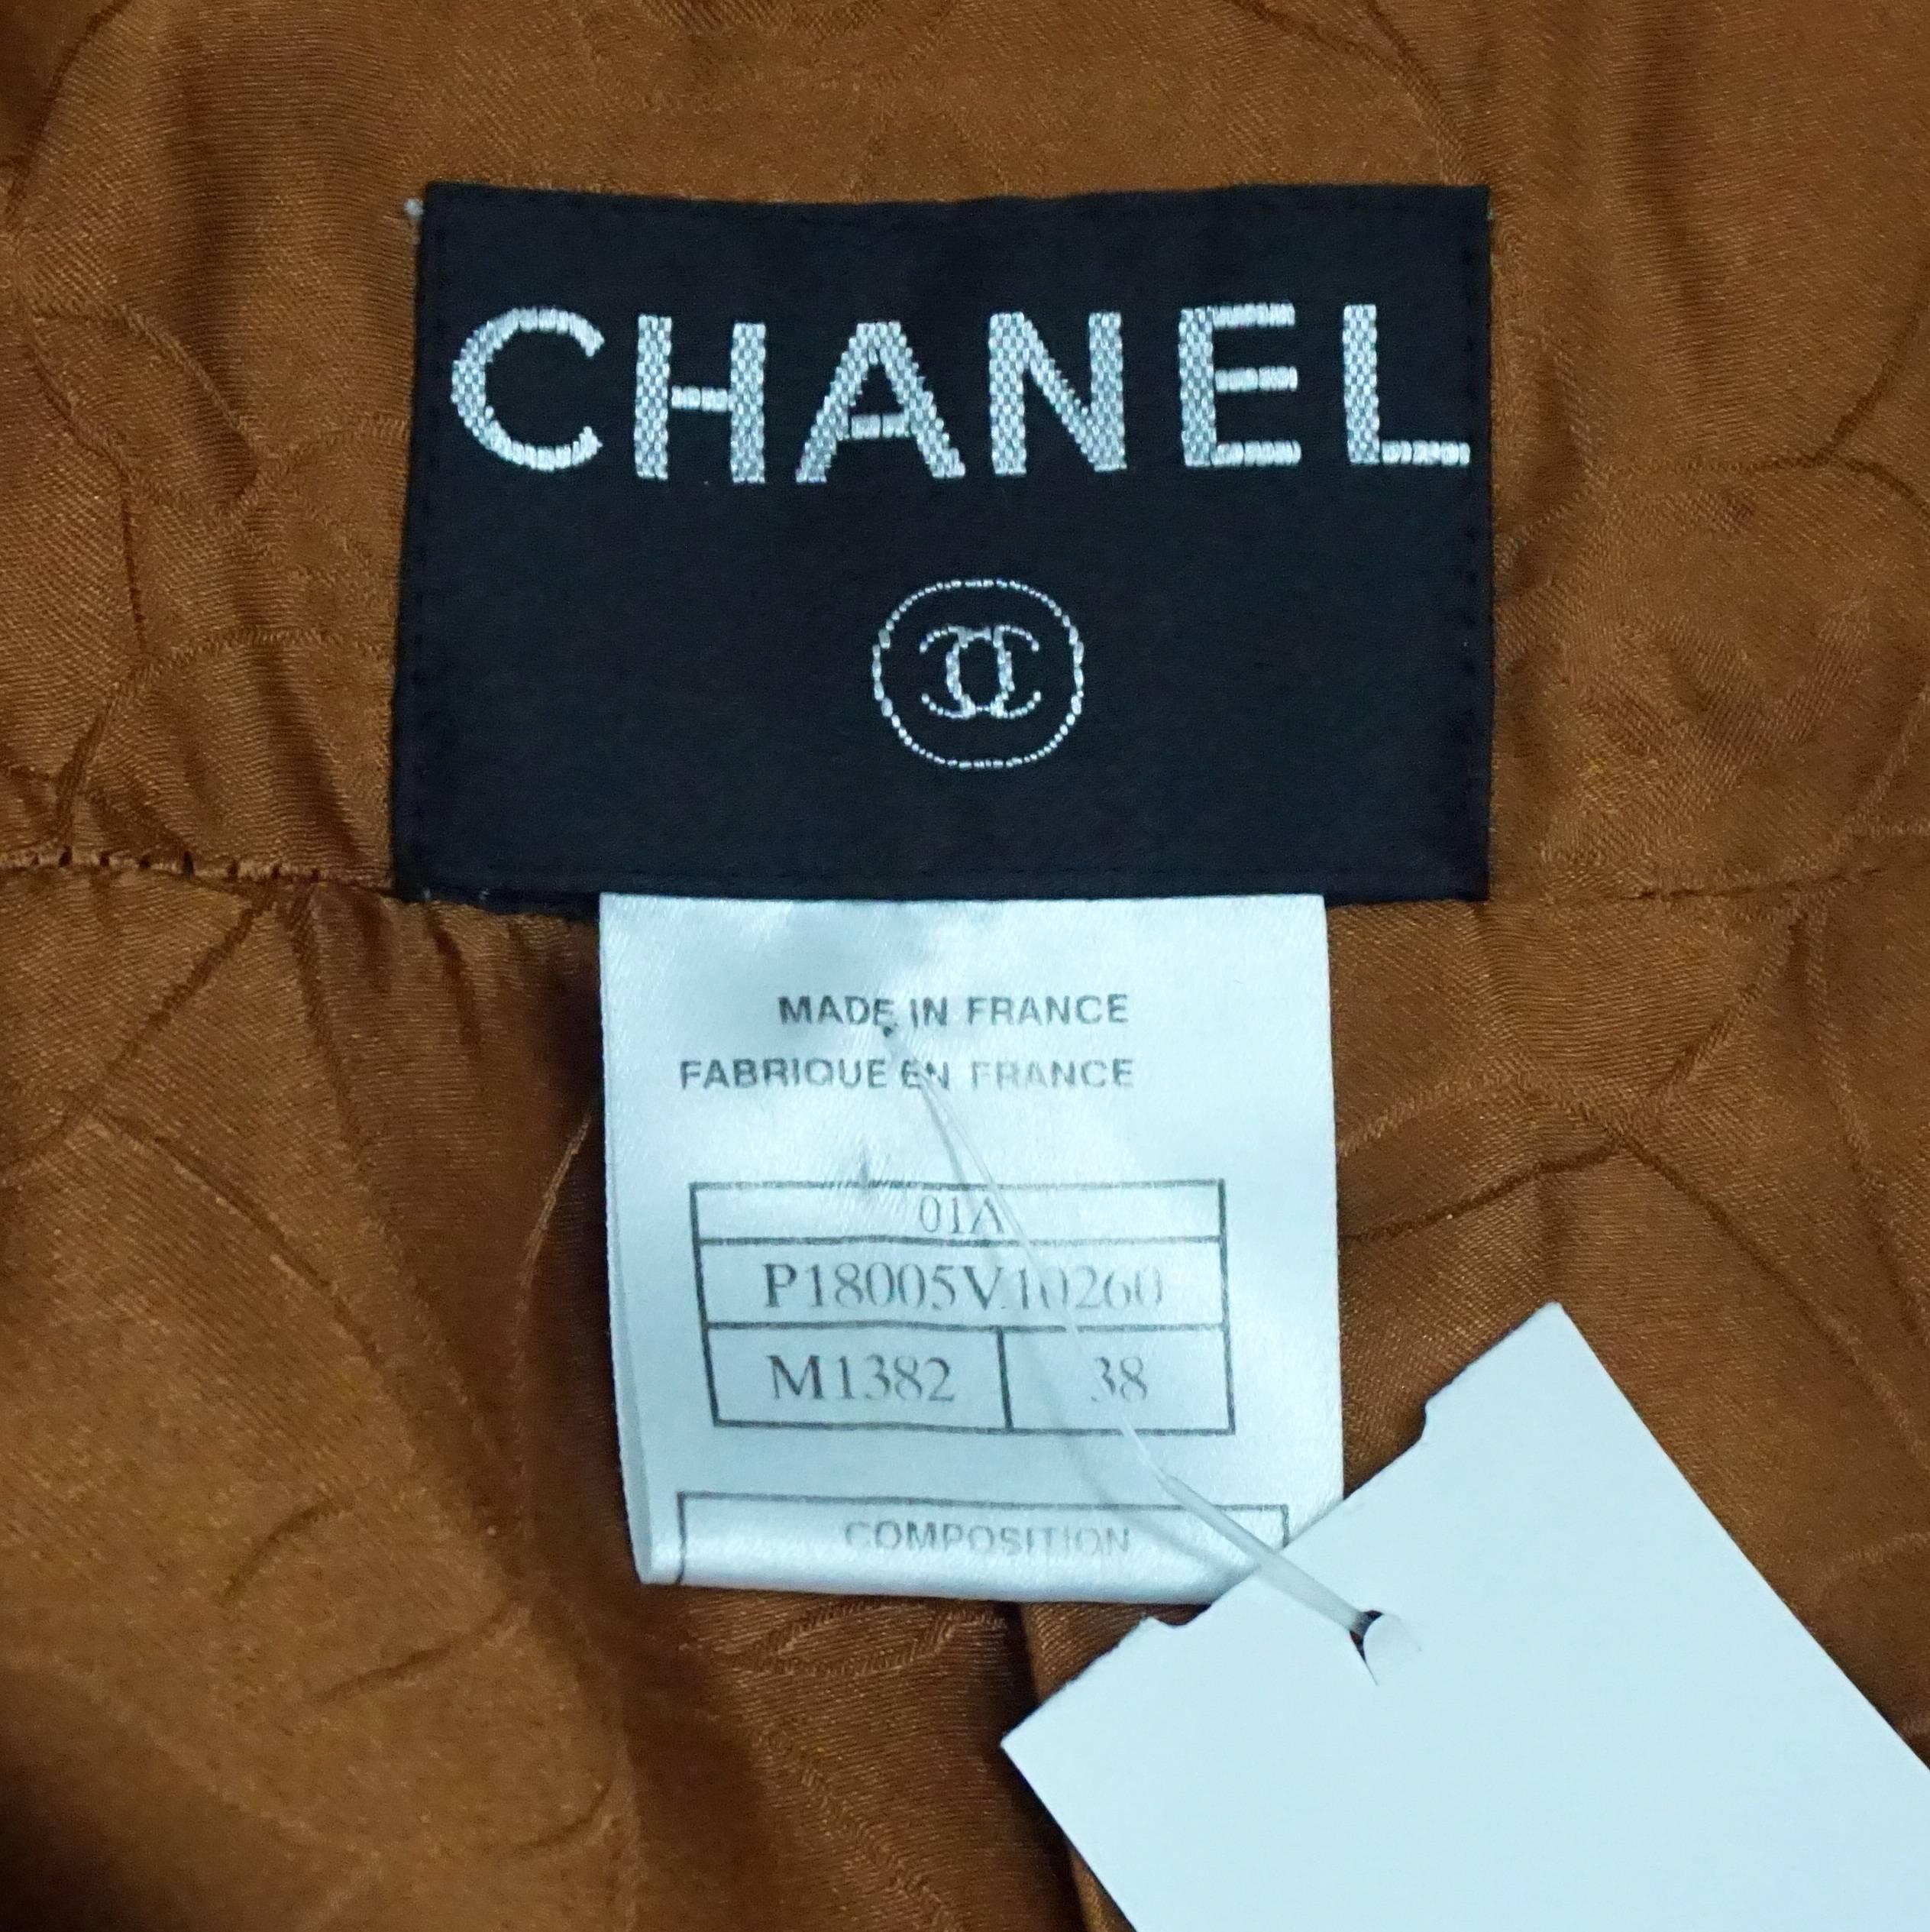 Chanel Burnt Orange Wool Blend Jacket with Removable Scarf - 38 - 01A 2